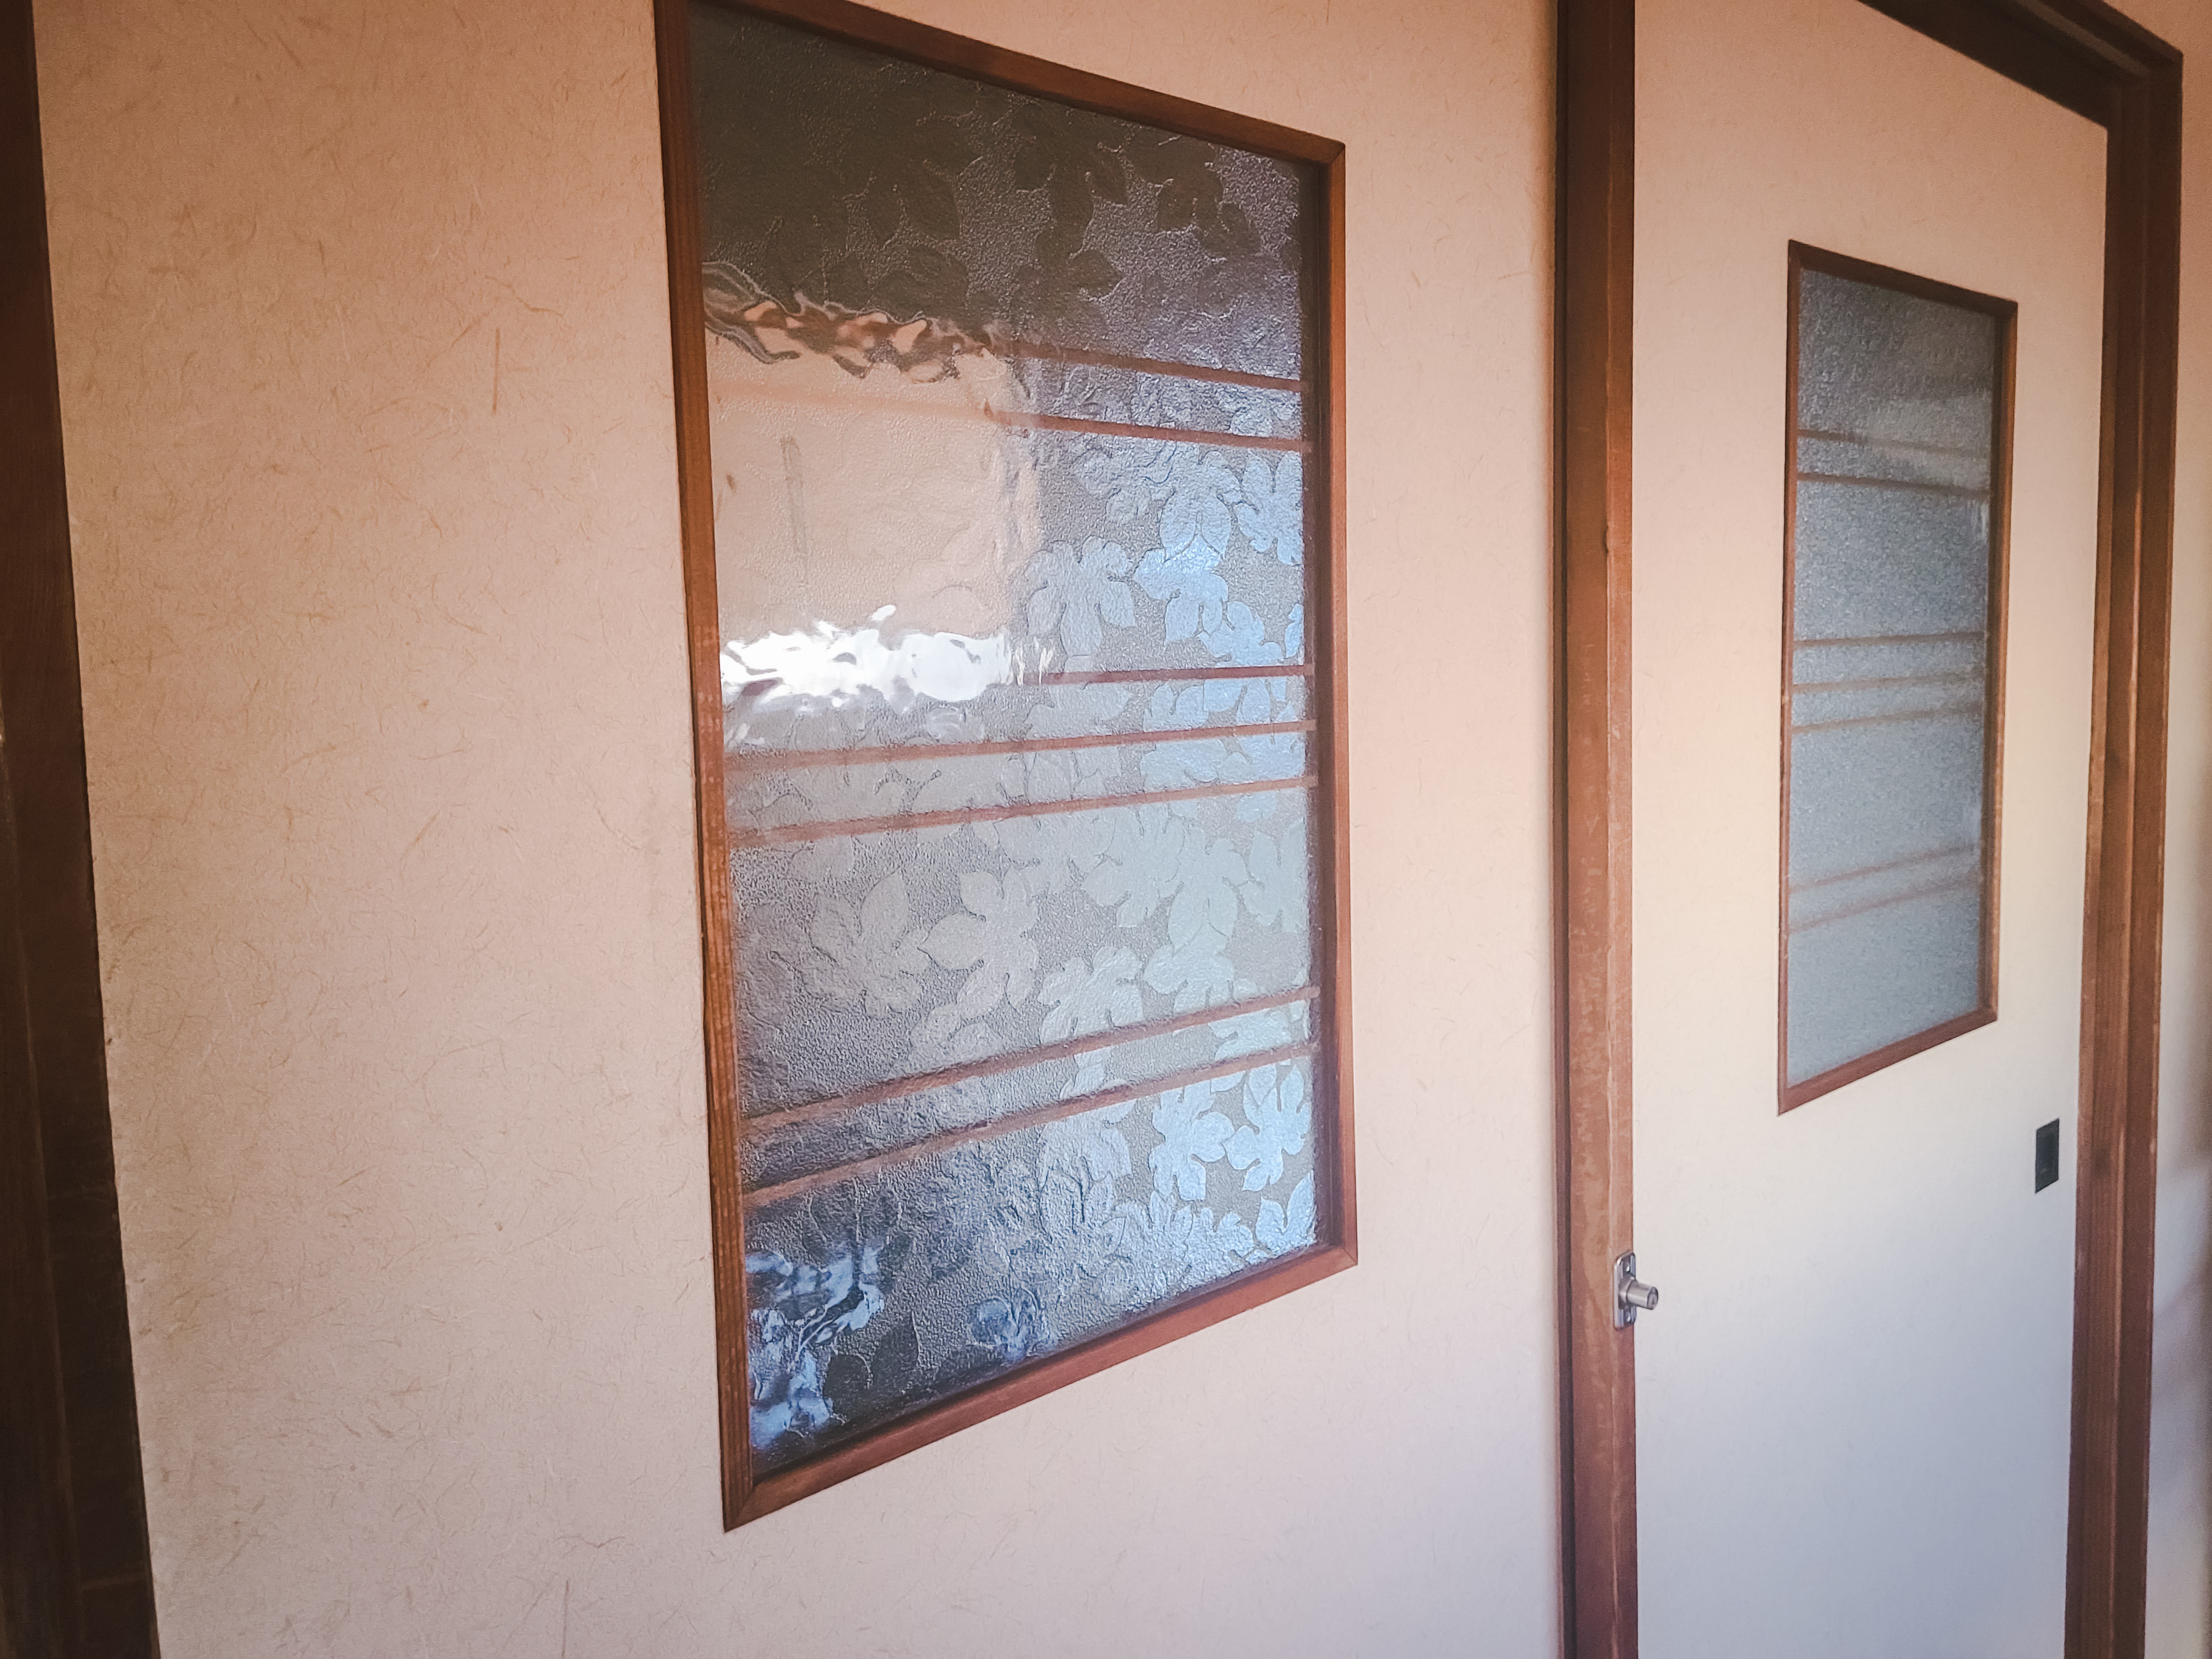 Glass on these sliding fusuma doors has the motif of autumn leaves